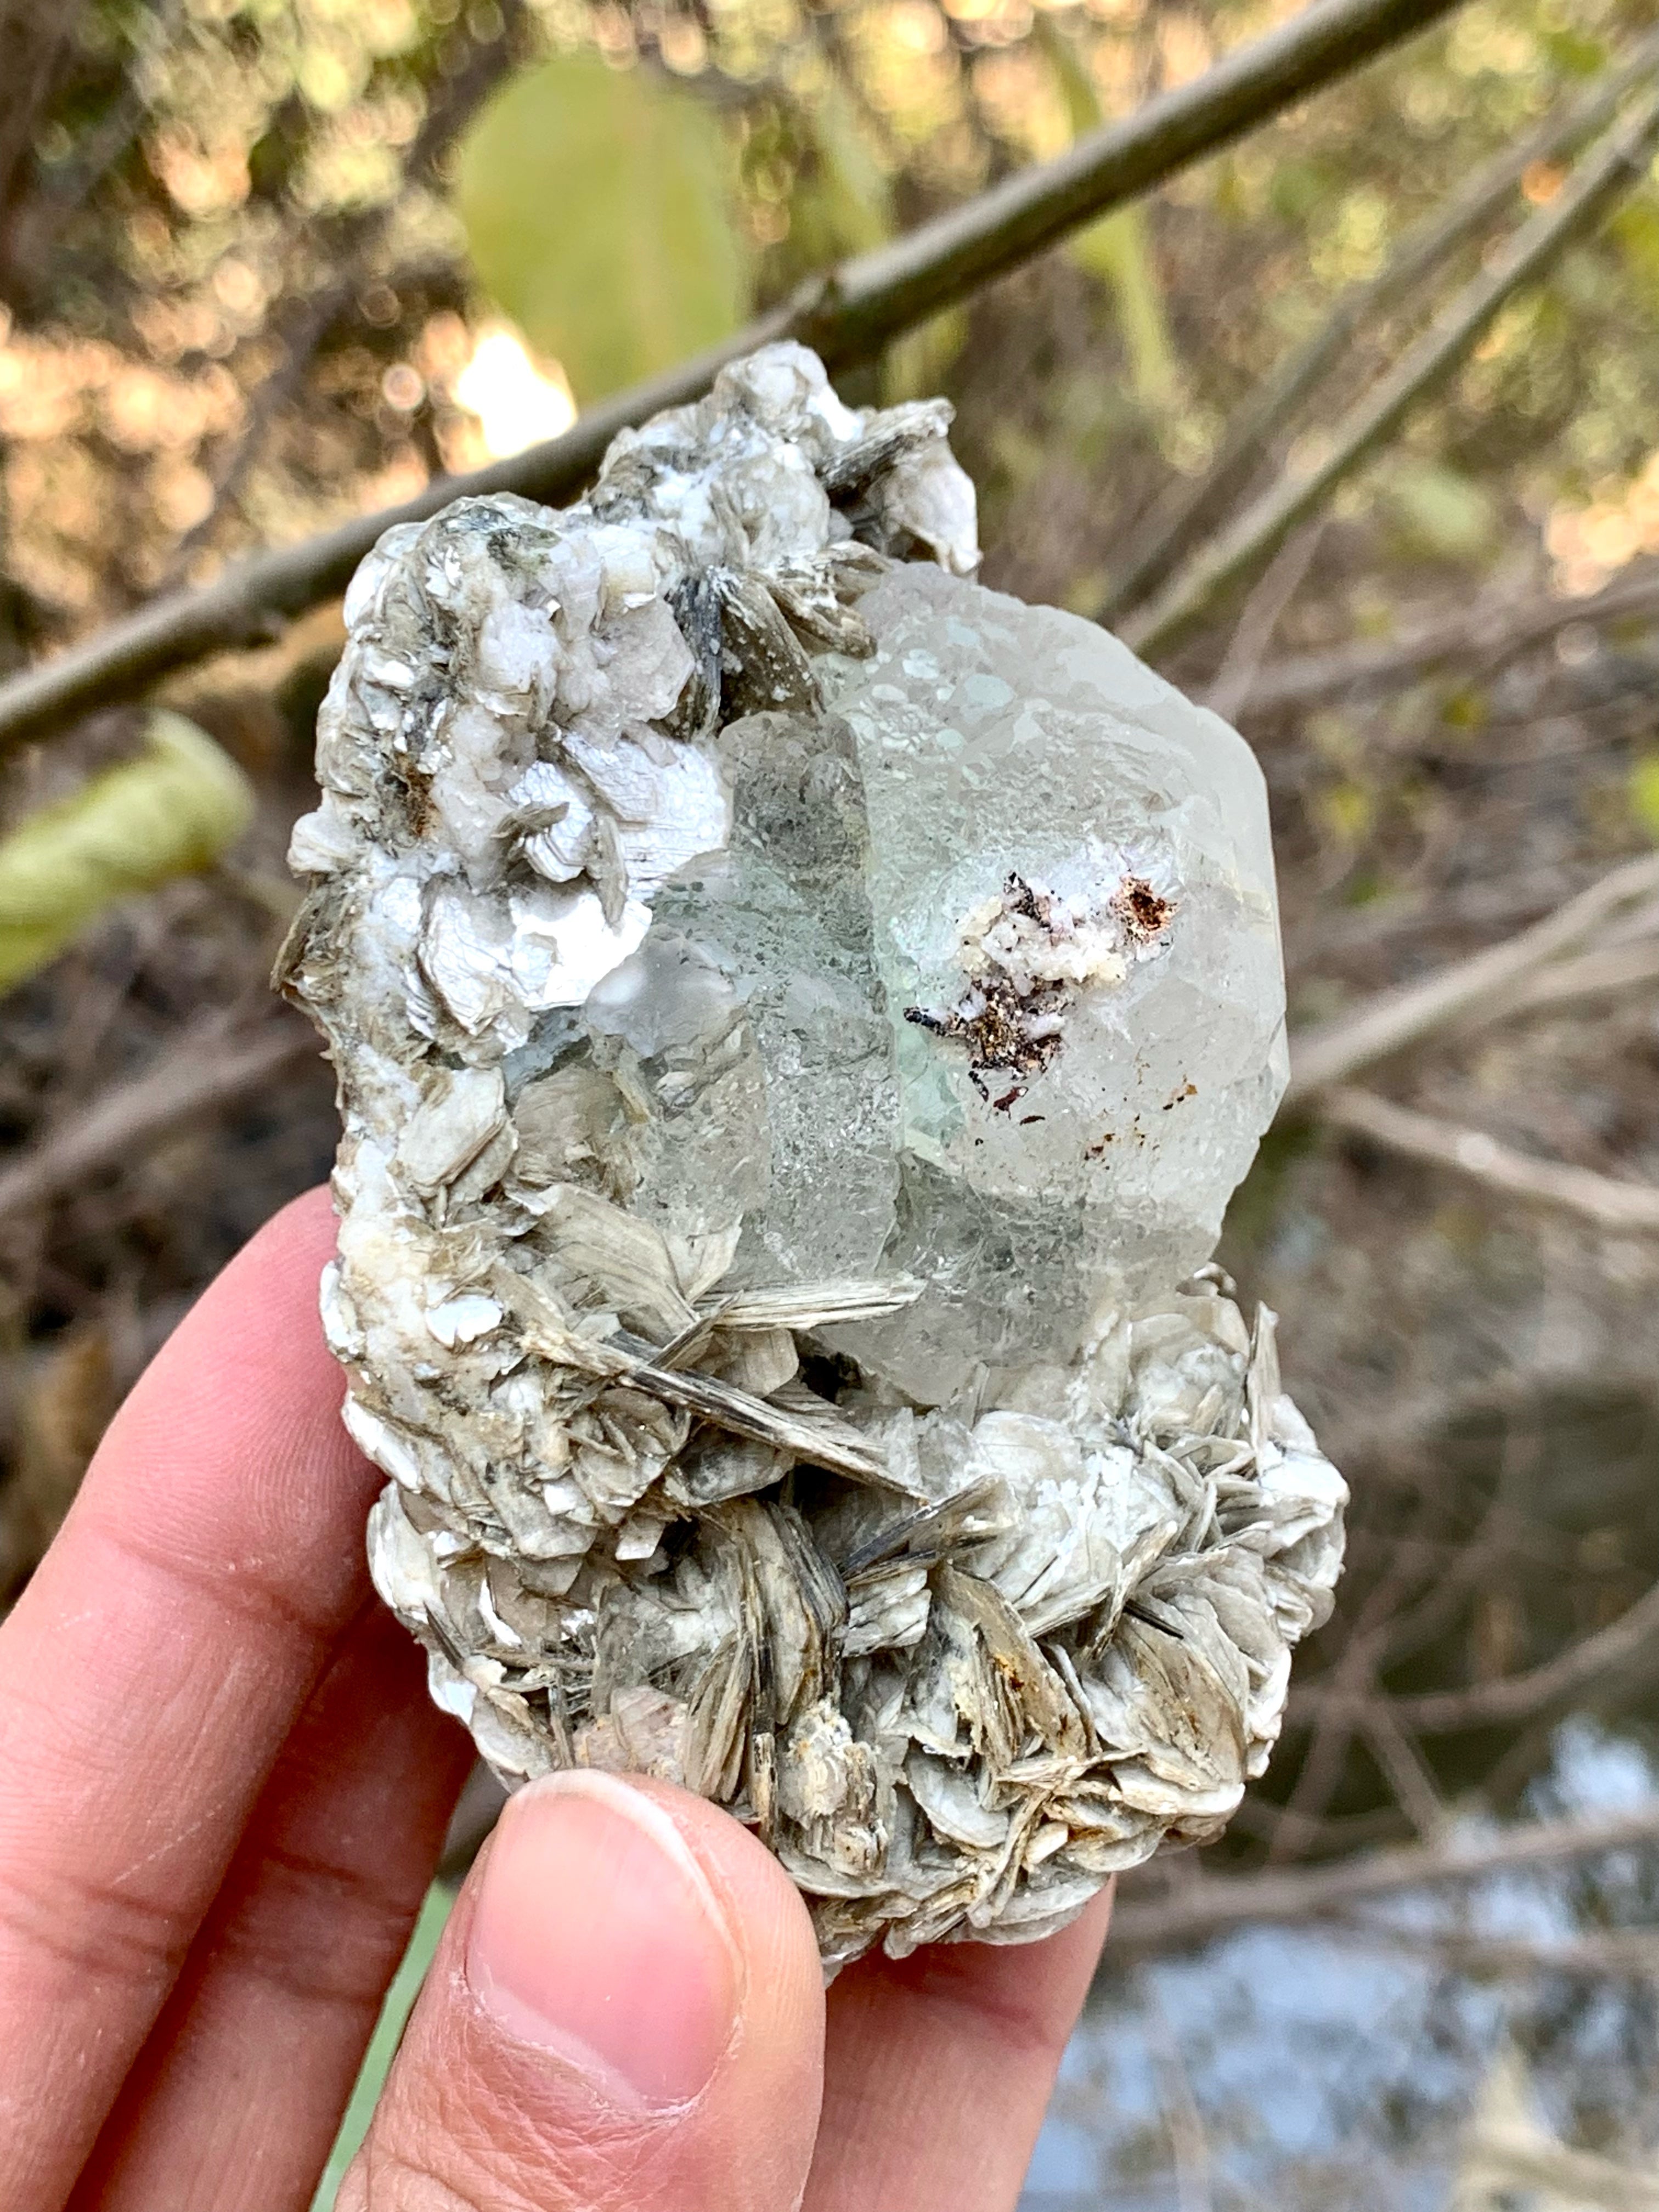 Focal Crystal Of Green Fluorite Nicely Positioned On Muscovite